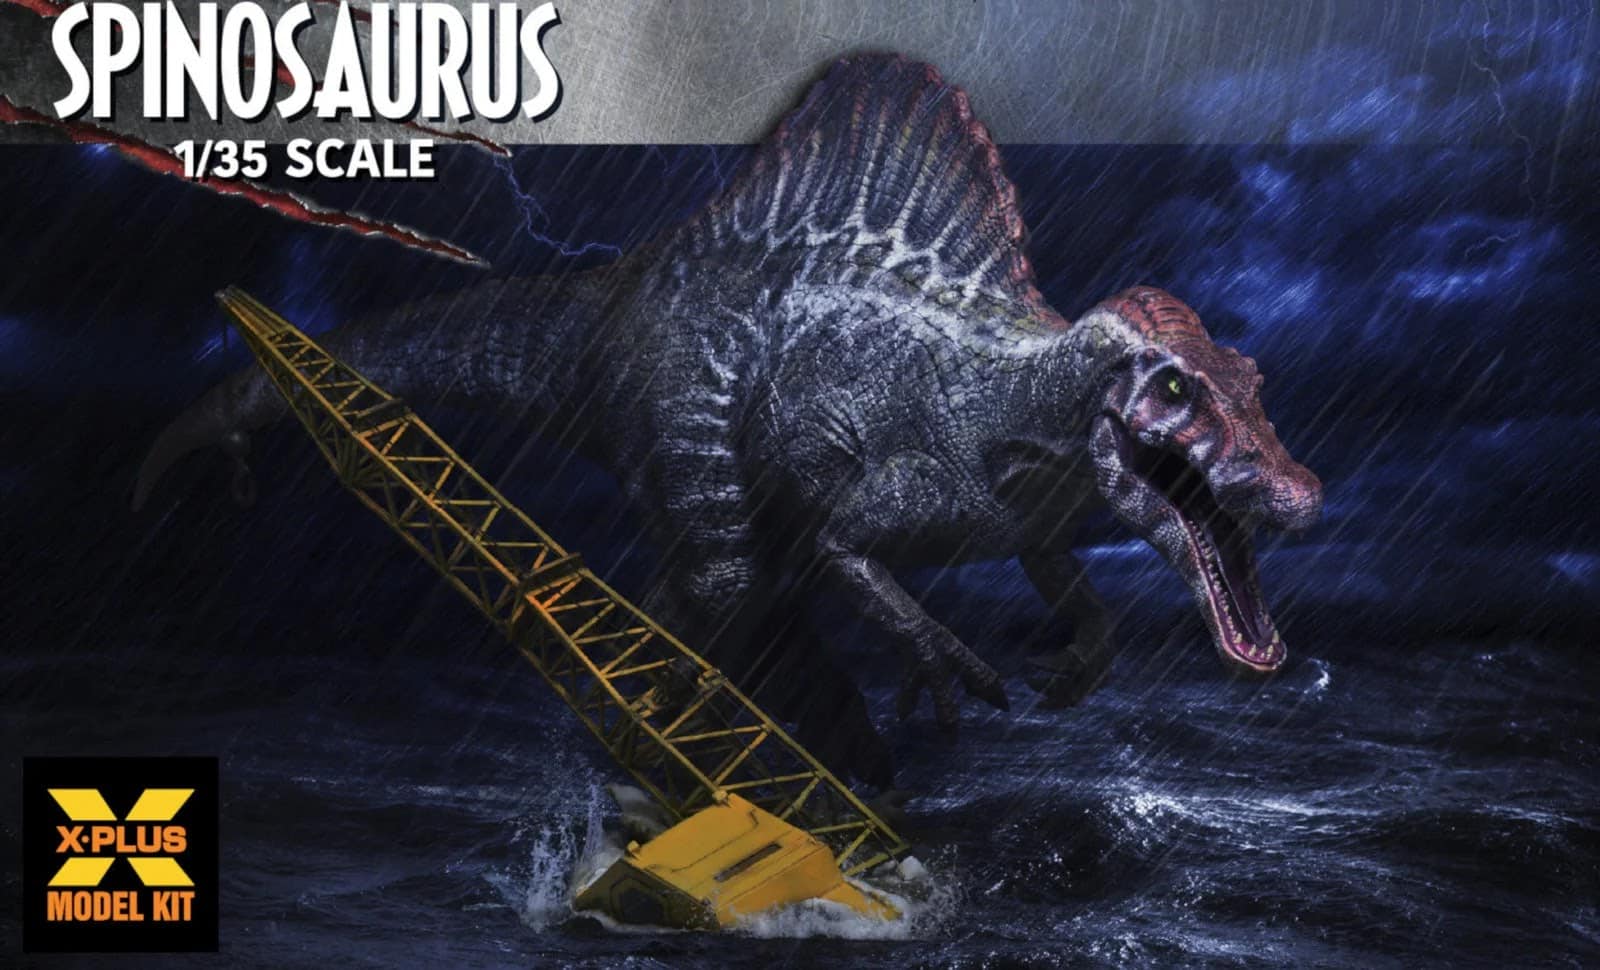 1/35th scale JP III Spinosaurus from X-Plus roars into view...